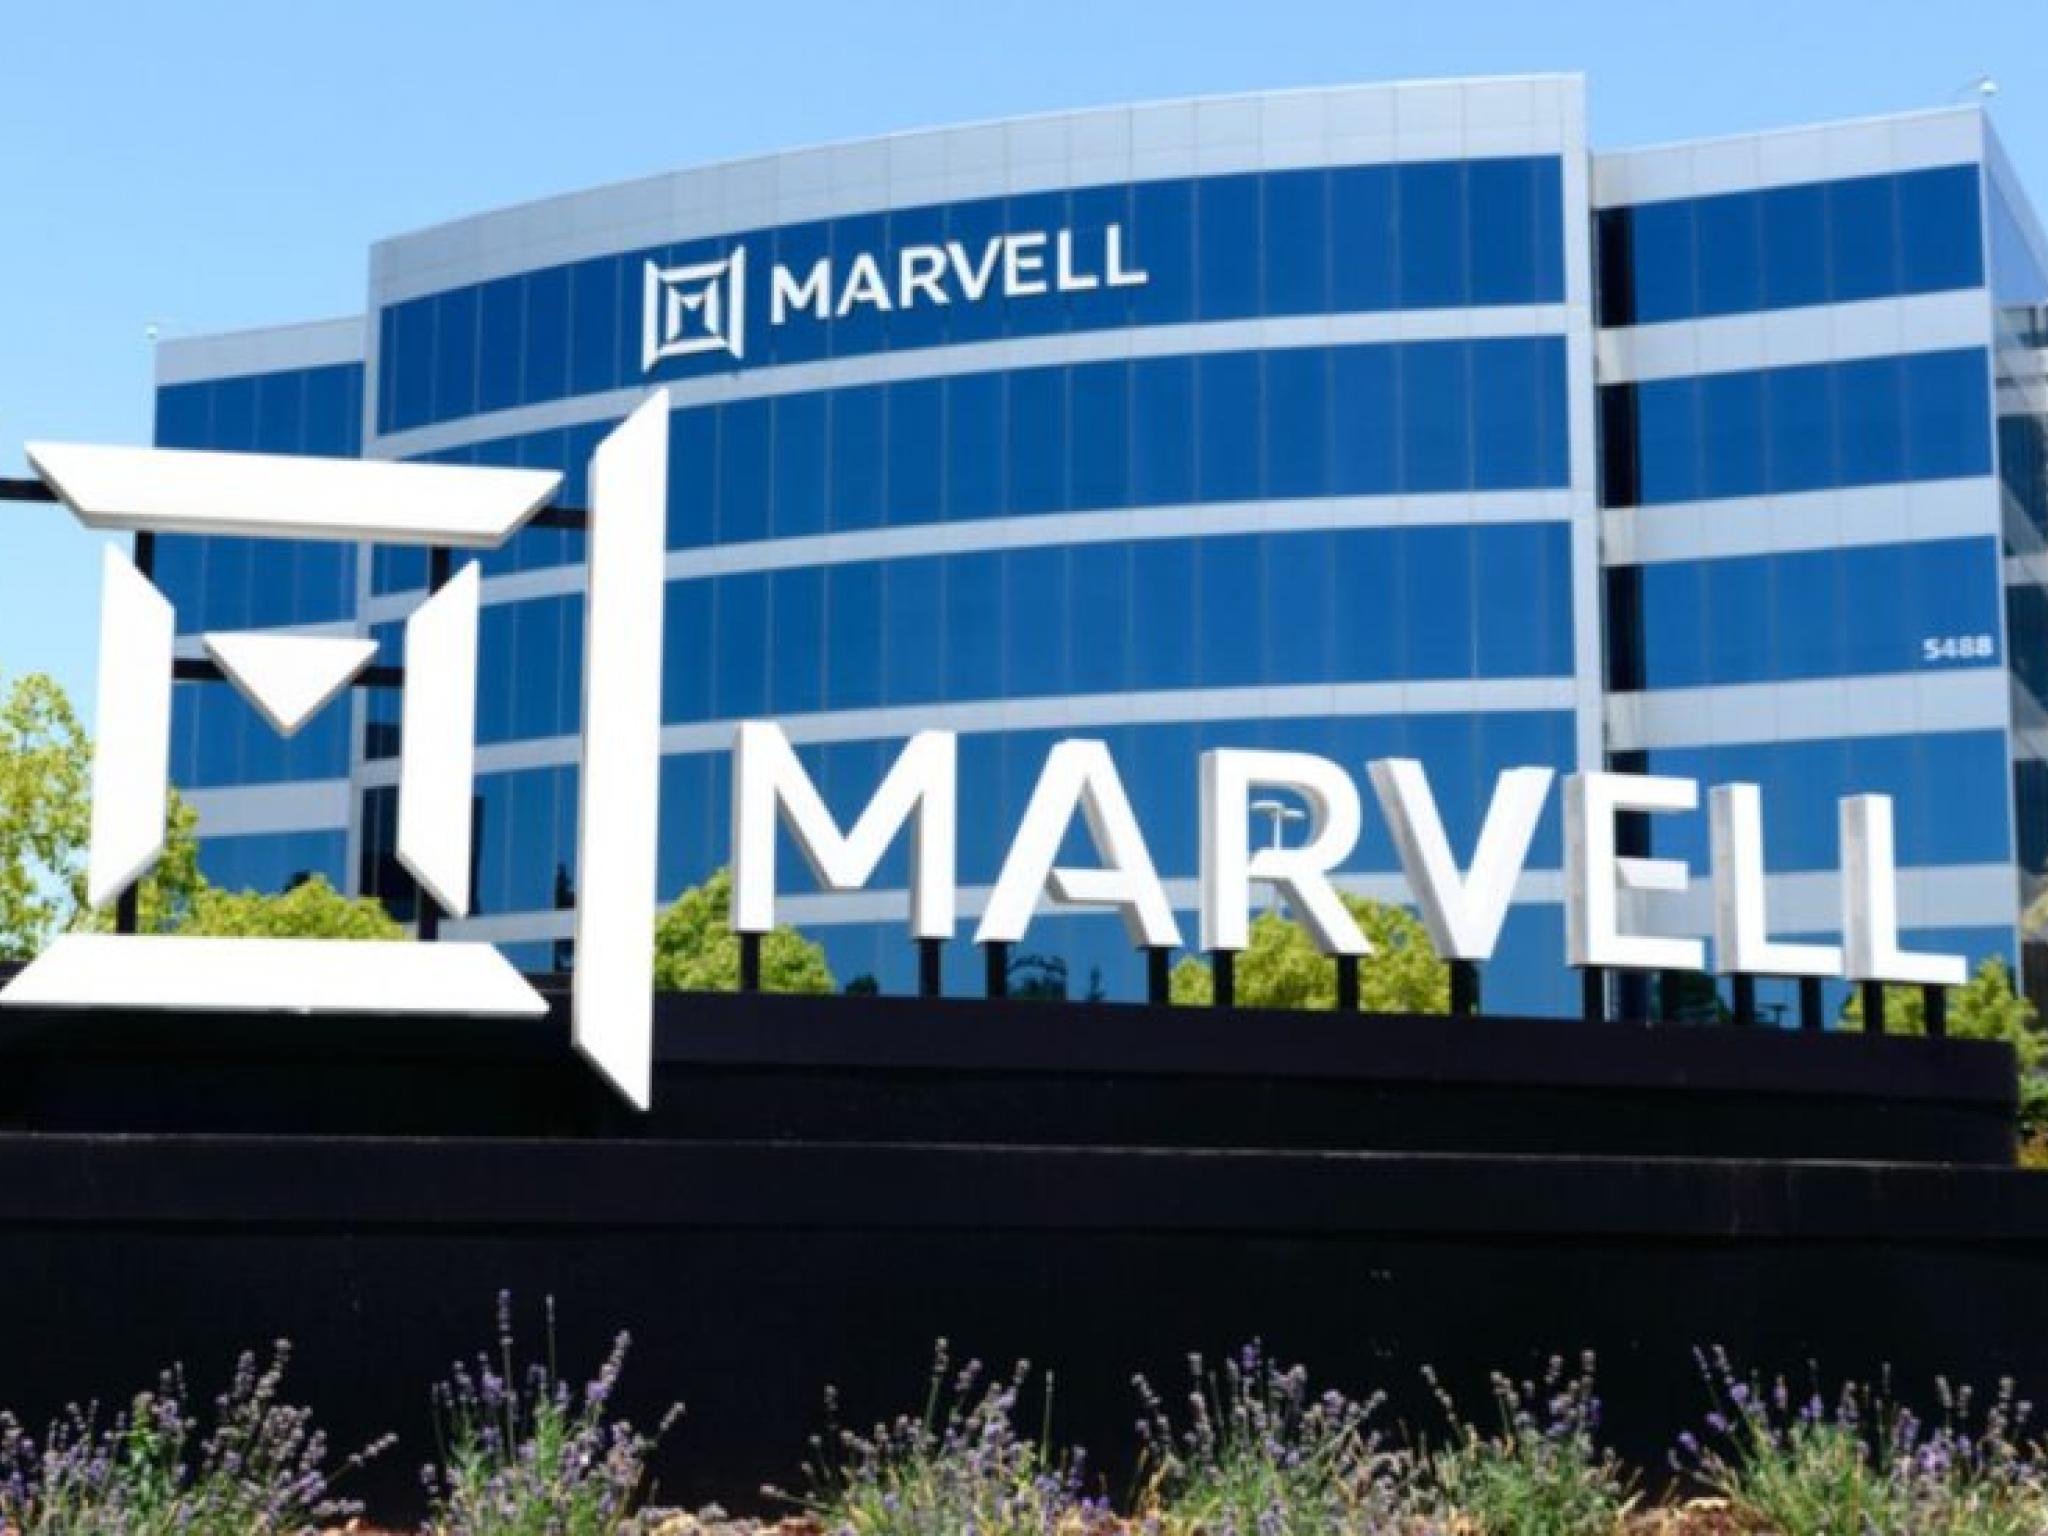  marvell-technology-q1-earnings-preview-investors-particularly-interested-in-companys-ai-business-second-half-growth 